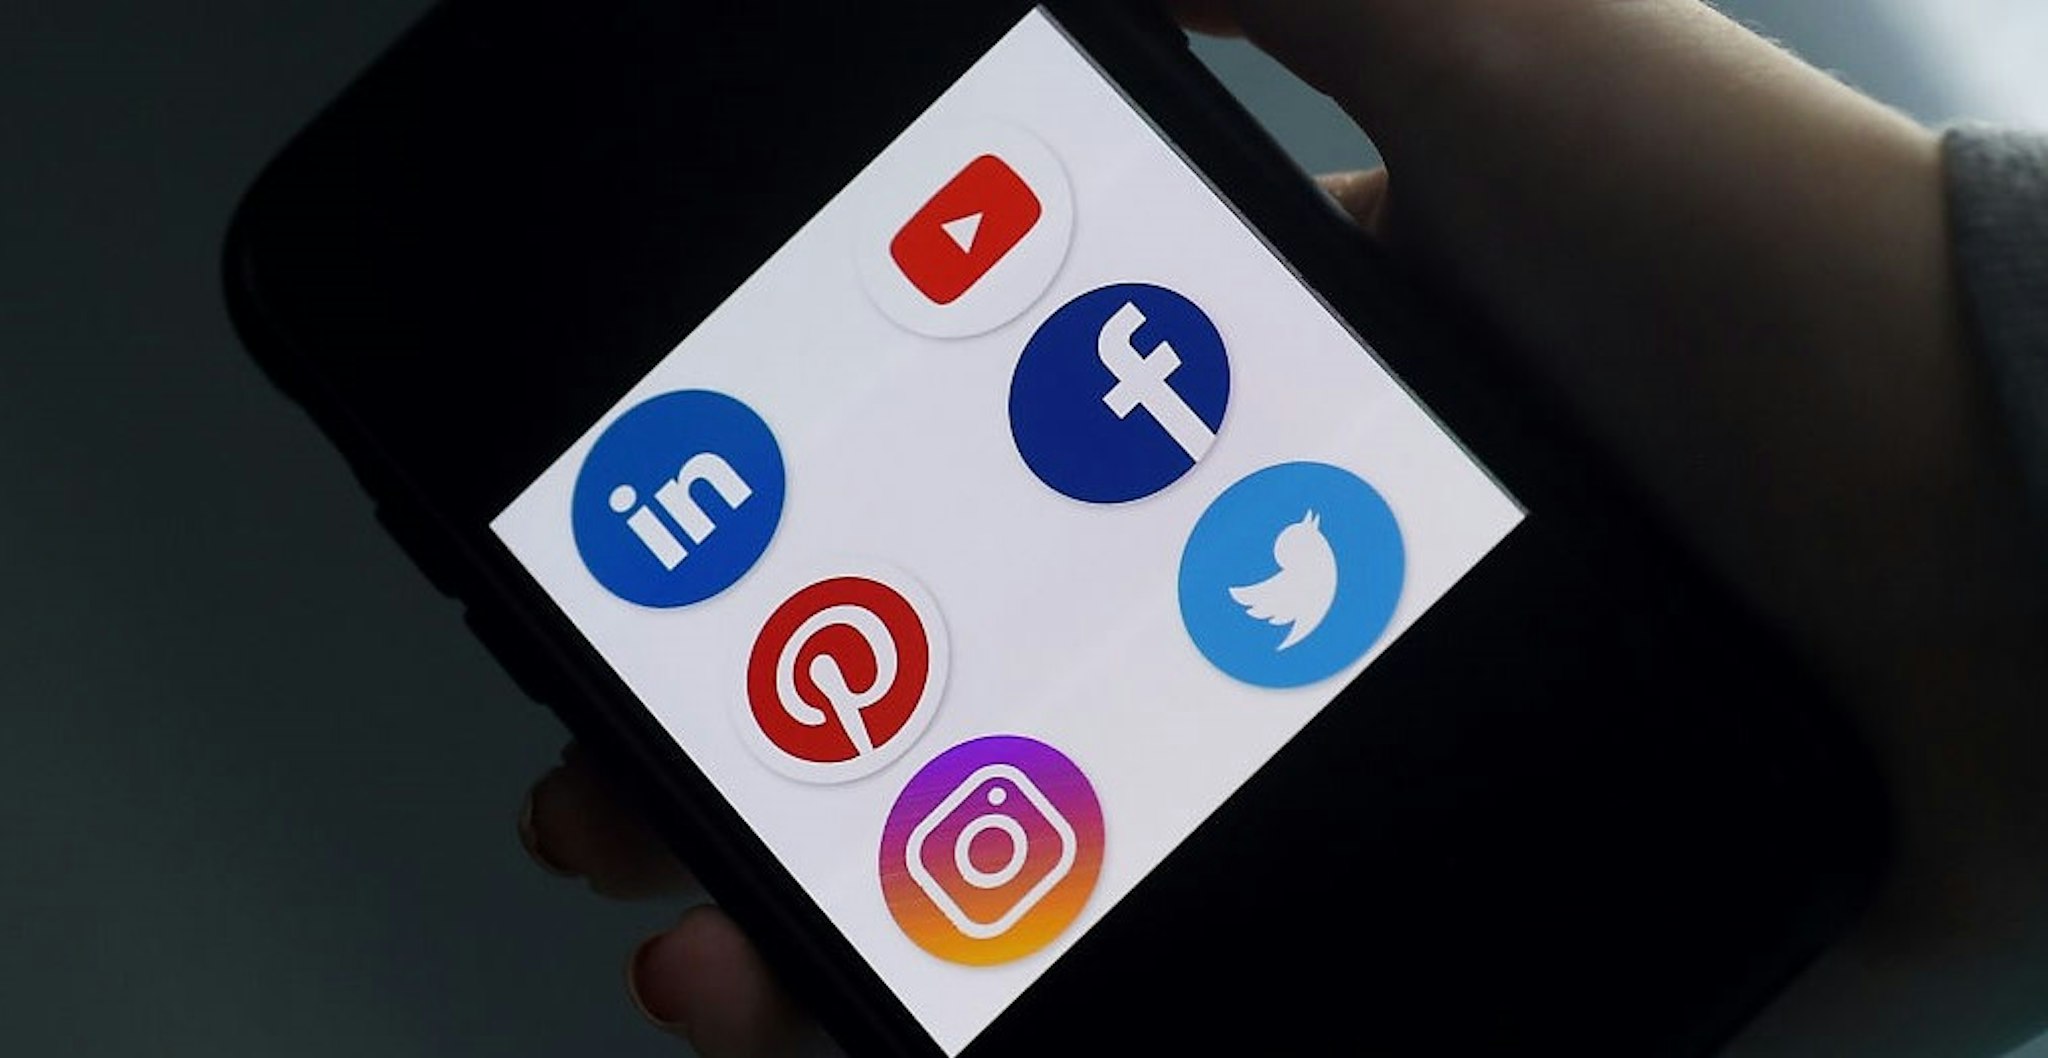 This illustration picture shows social media applications logos from Linkedin, YouTube, Pinterest, Facebook, Instagram and Twitter displayed on a smartphone in Arlington, Virginia on May 28, 2020. - Trump is expected to sign an executive order on May 28, 2020, after threatening to shutter social media platforms following Twitter's move to label two of his tweets misleading. (Photo by Olivier DOULIERY / AFP) (Photo by